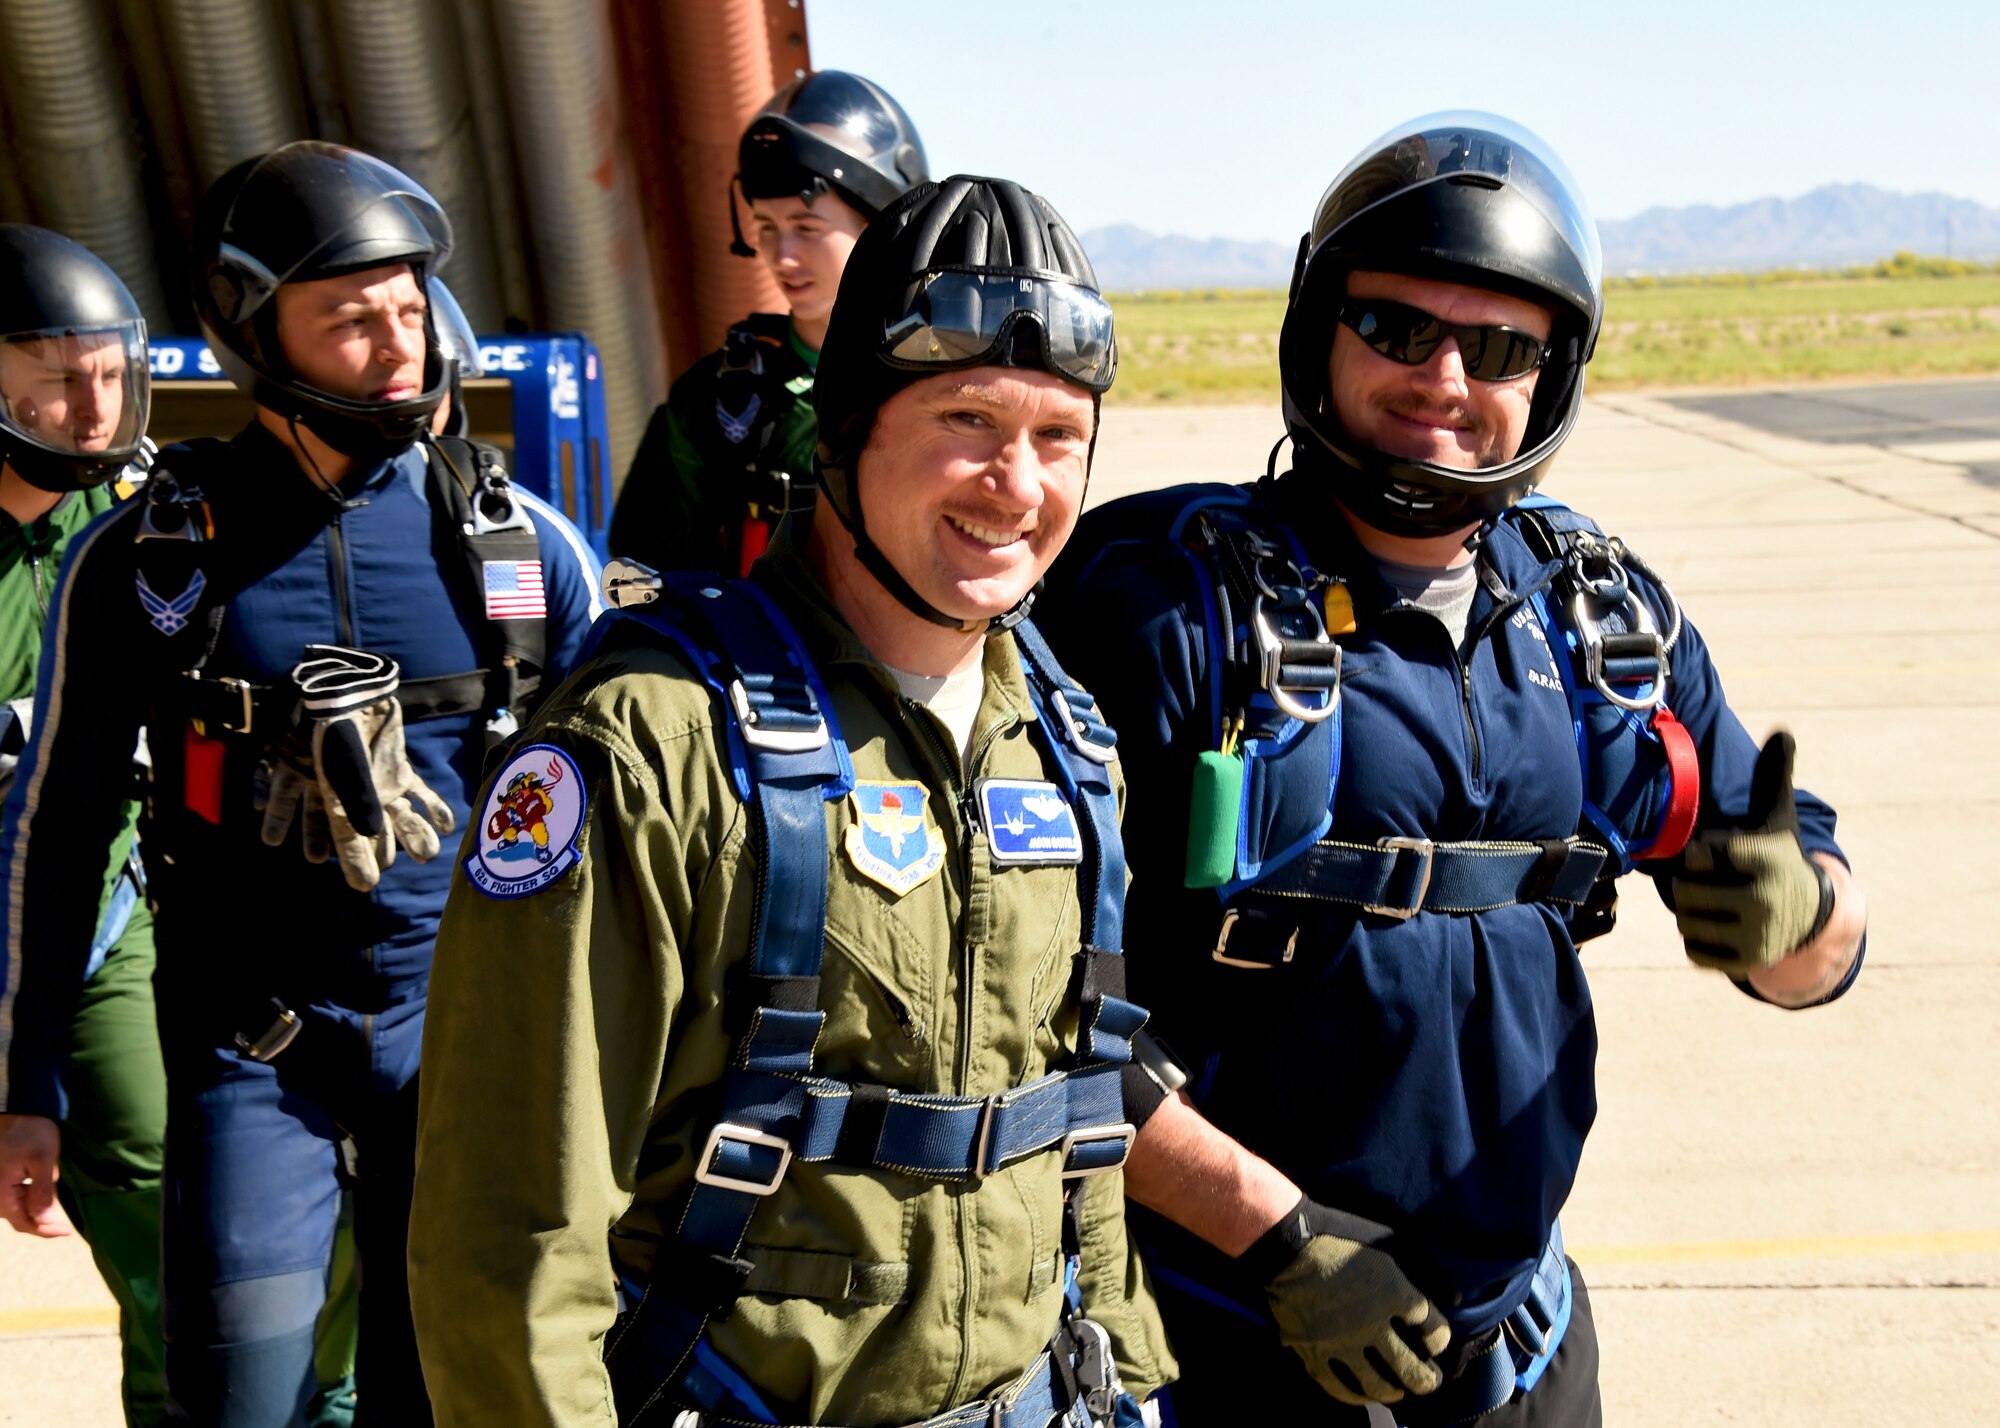 Lt. Col. Jason Bartels, 62nd Fighter Squadron pilot, prepares to skydive for the first time with the Wings of Blue Parachute Team, March 29, 2017 at the Barry M. Goldwater Range in Gila Bend, Ariz. Throughout the week, Luke AFB supported the Wings of Blue mission by coordinating the use of the range and allowing the use of the facilities in Gila Bend.  (U.S. Air Force photo by Airman 1st Class Caleb Worpel)